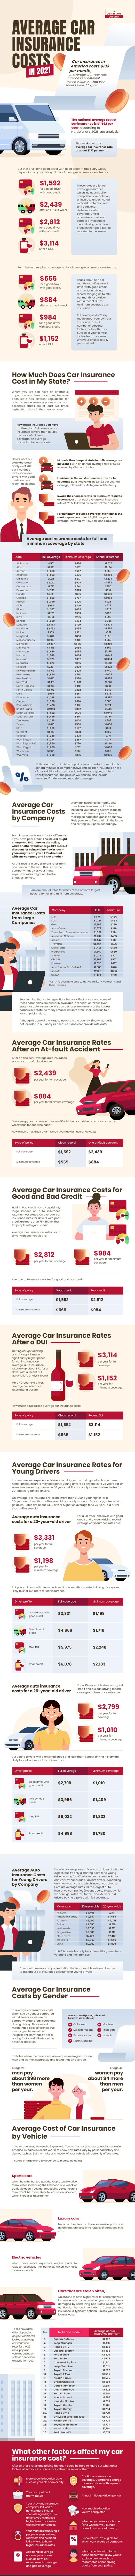 Average car insurance costs - infographic